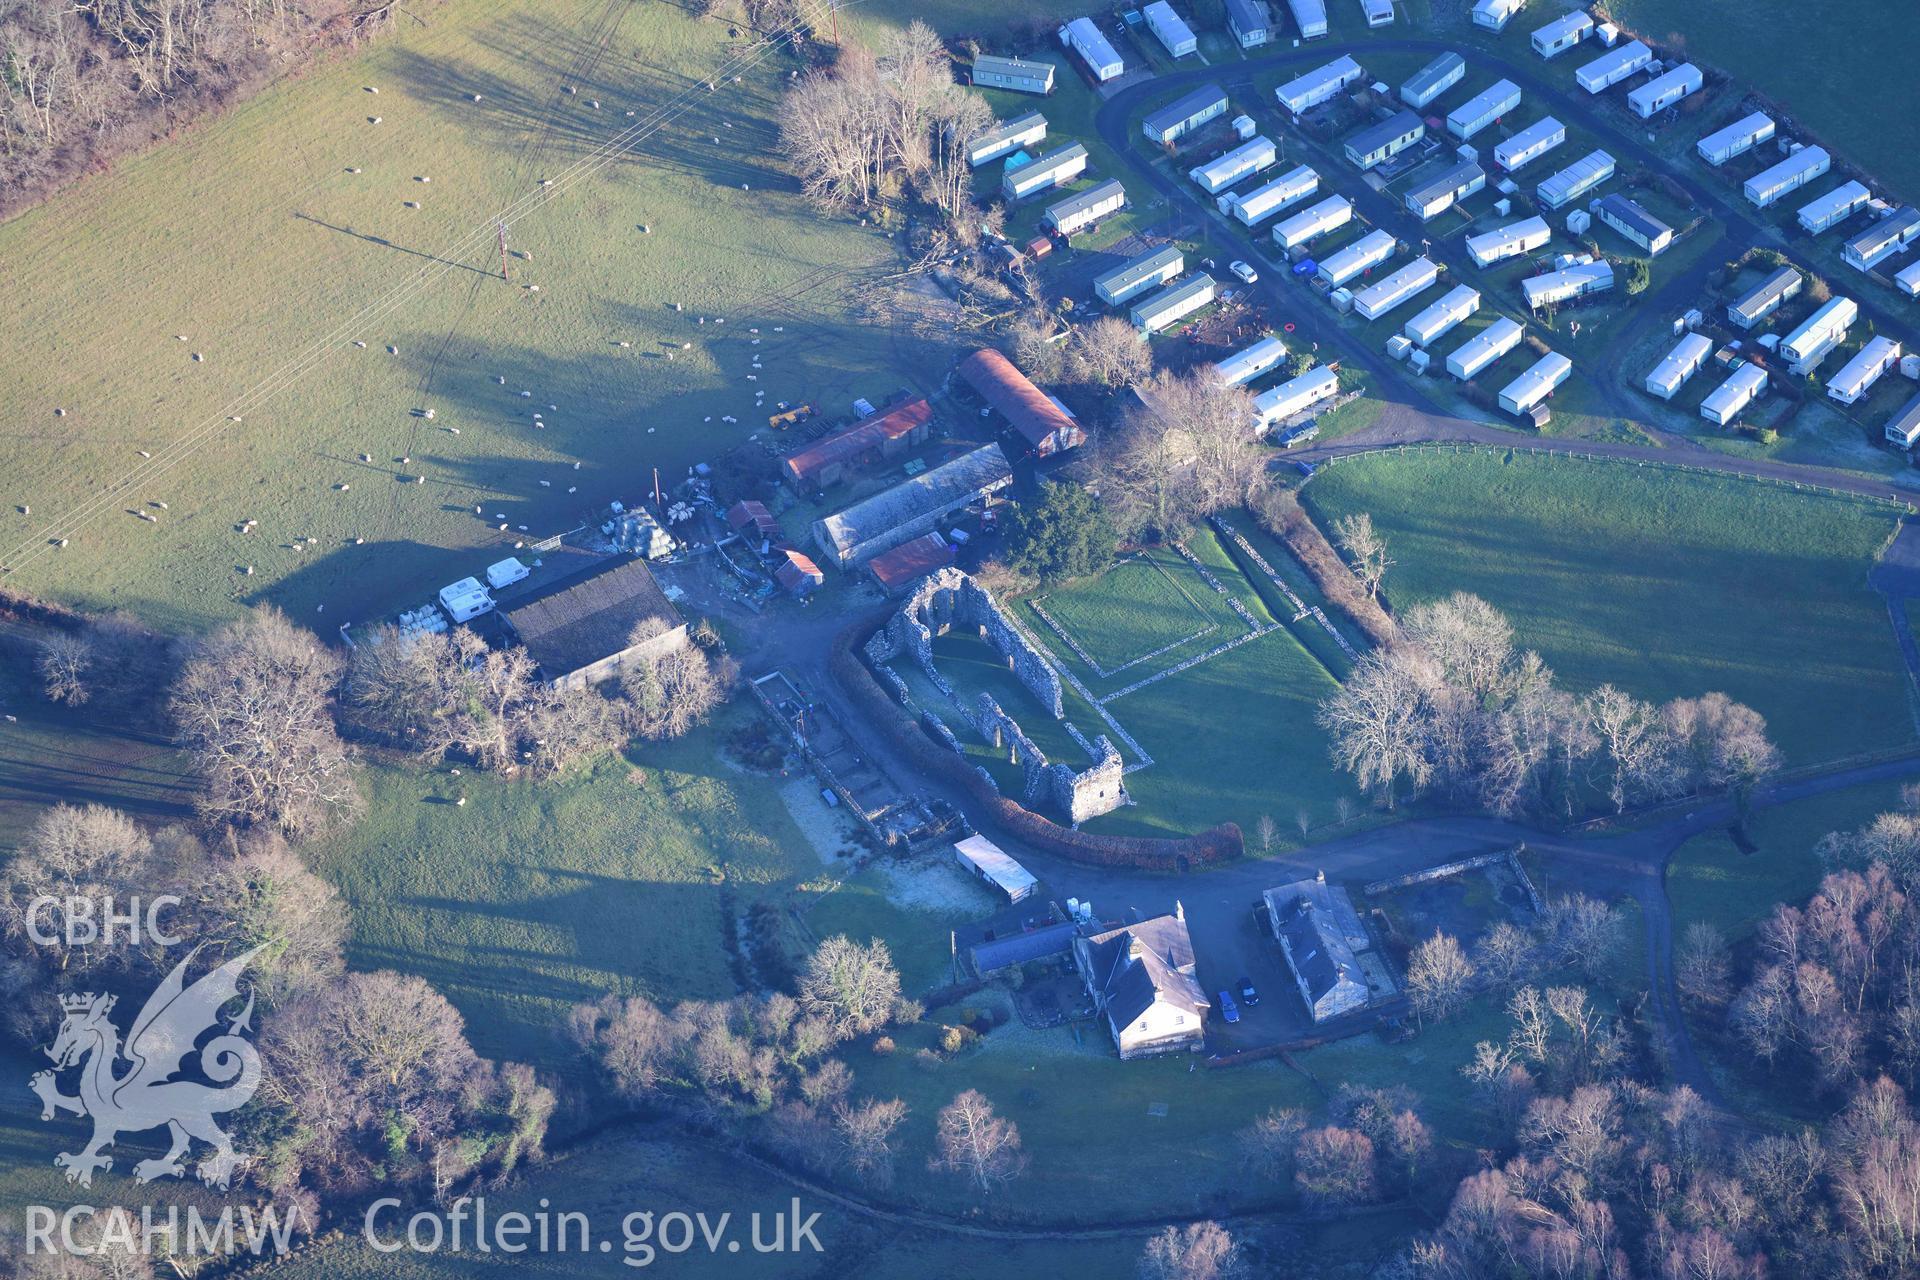 Oblique aerial photograph of Cymmer Abbey taken during the Royal Commission’s programme of archaeological aerial reconnaissance by Toby Driver on 17th January 2022